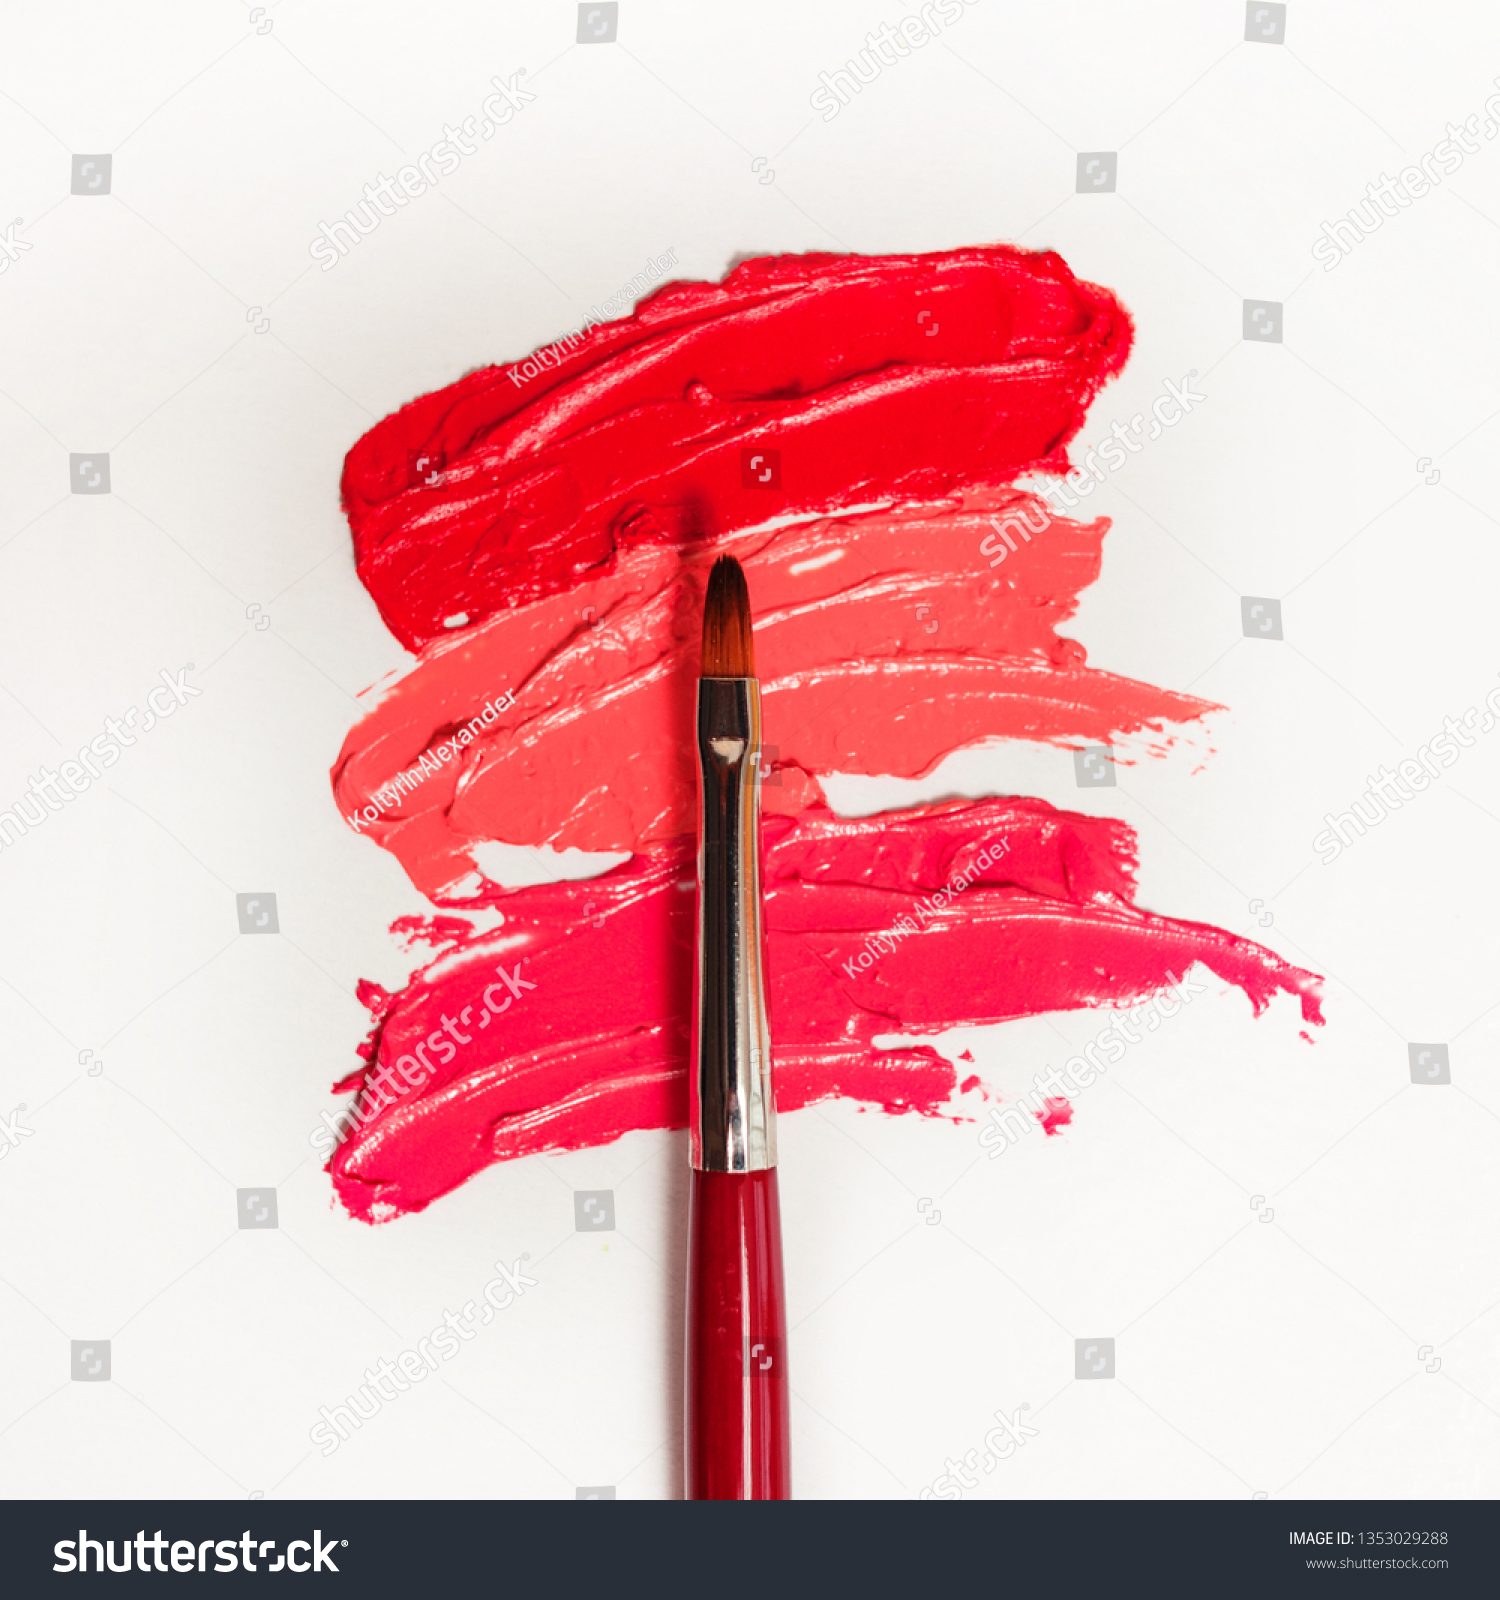 Lipstick and lip gloss, drops and strokes of different shades With brushes for application and shading, white background #1353029288